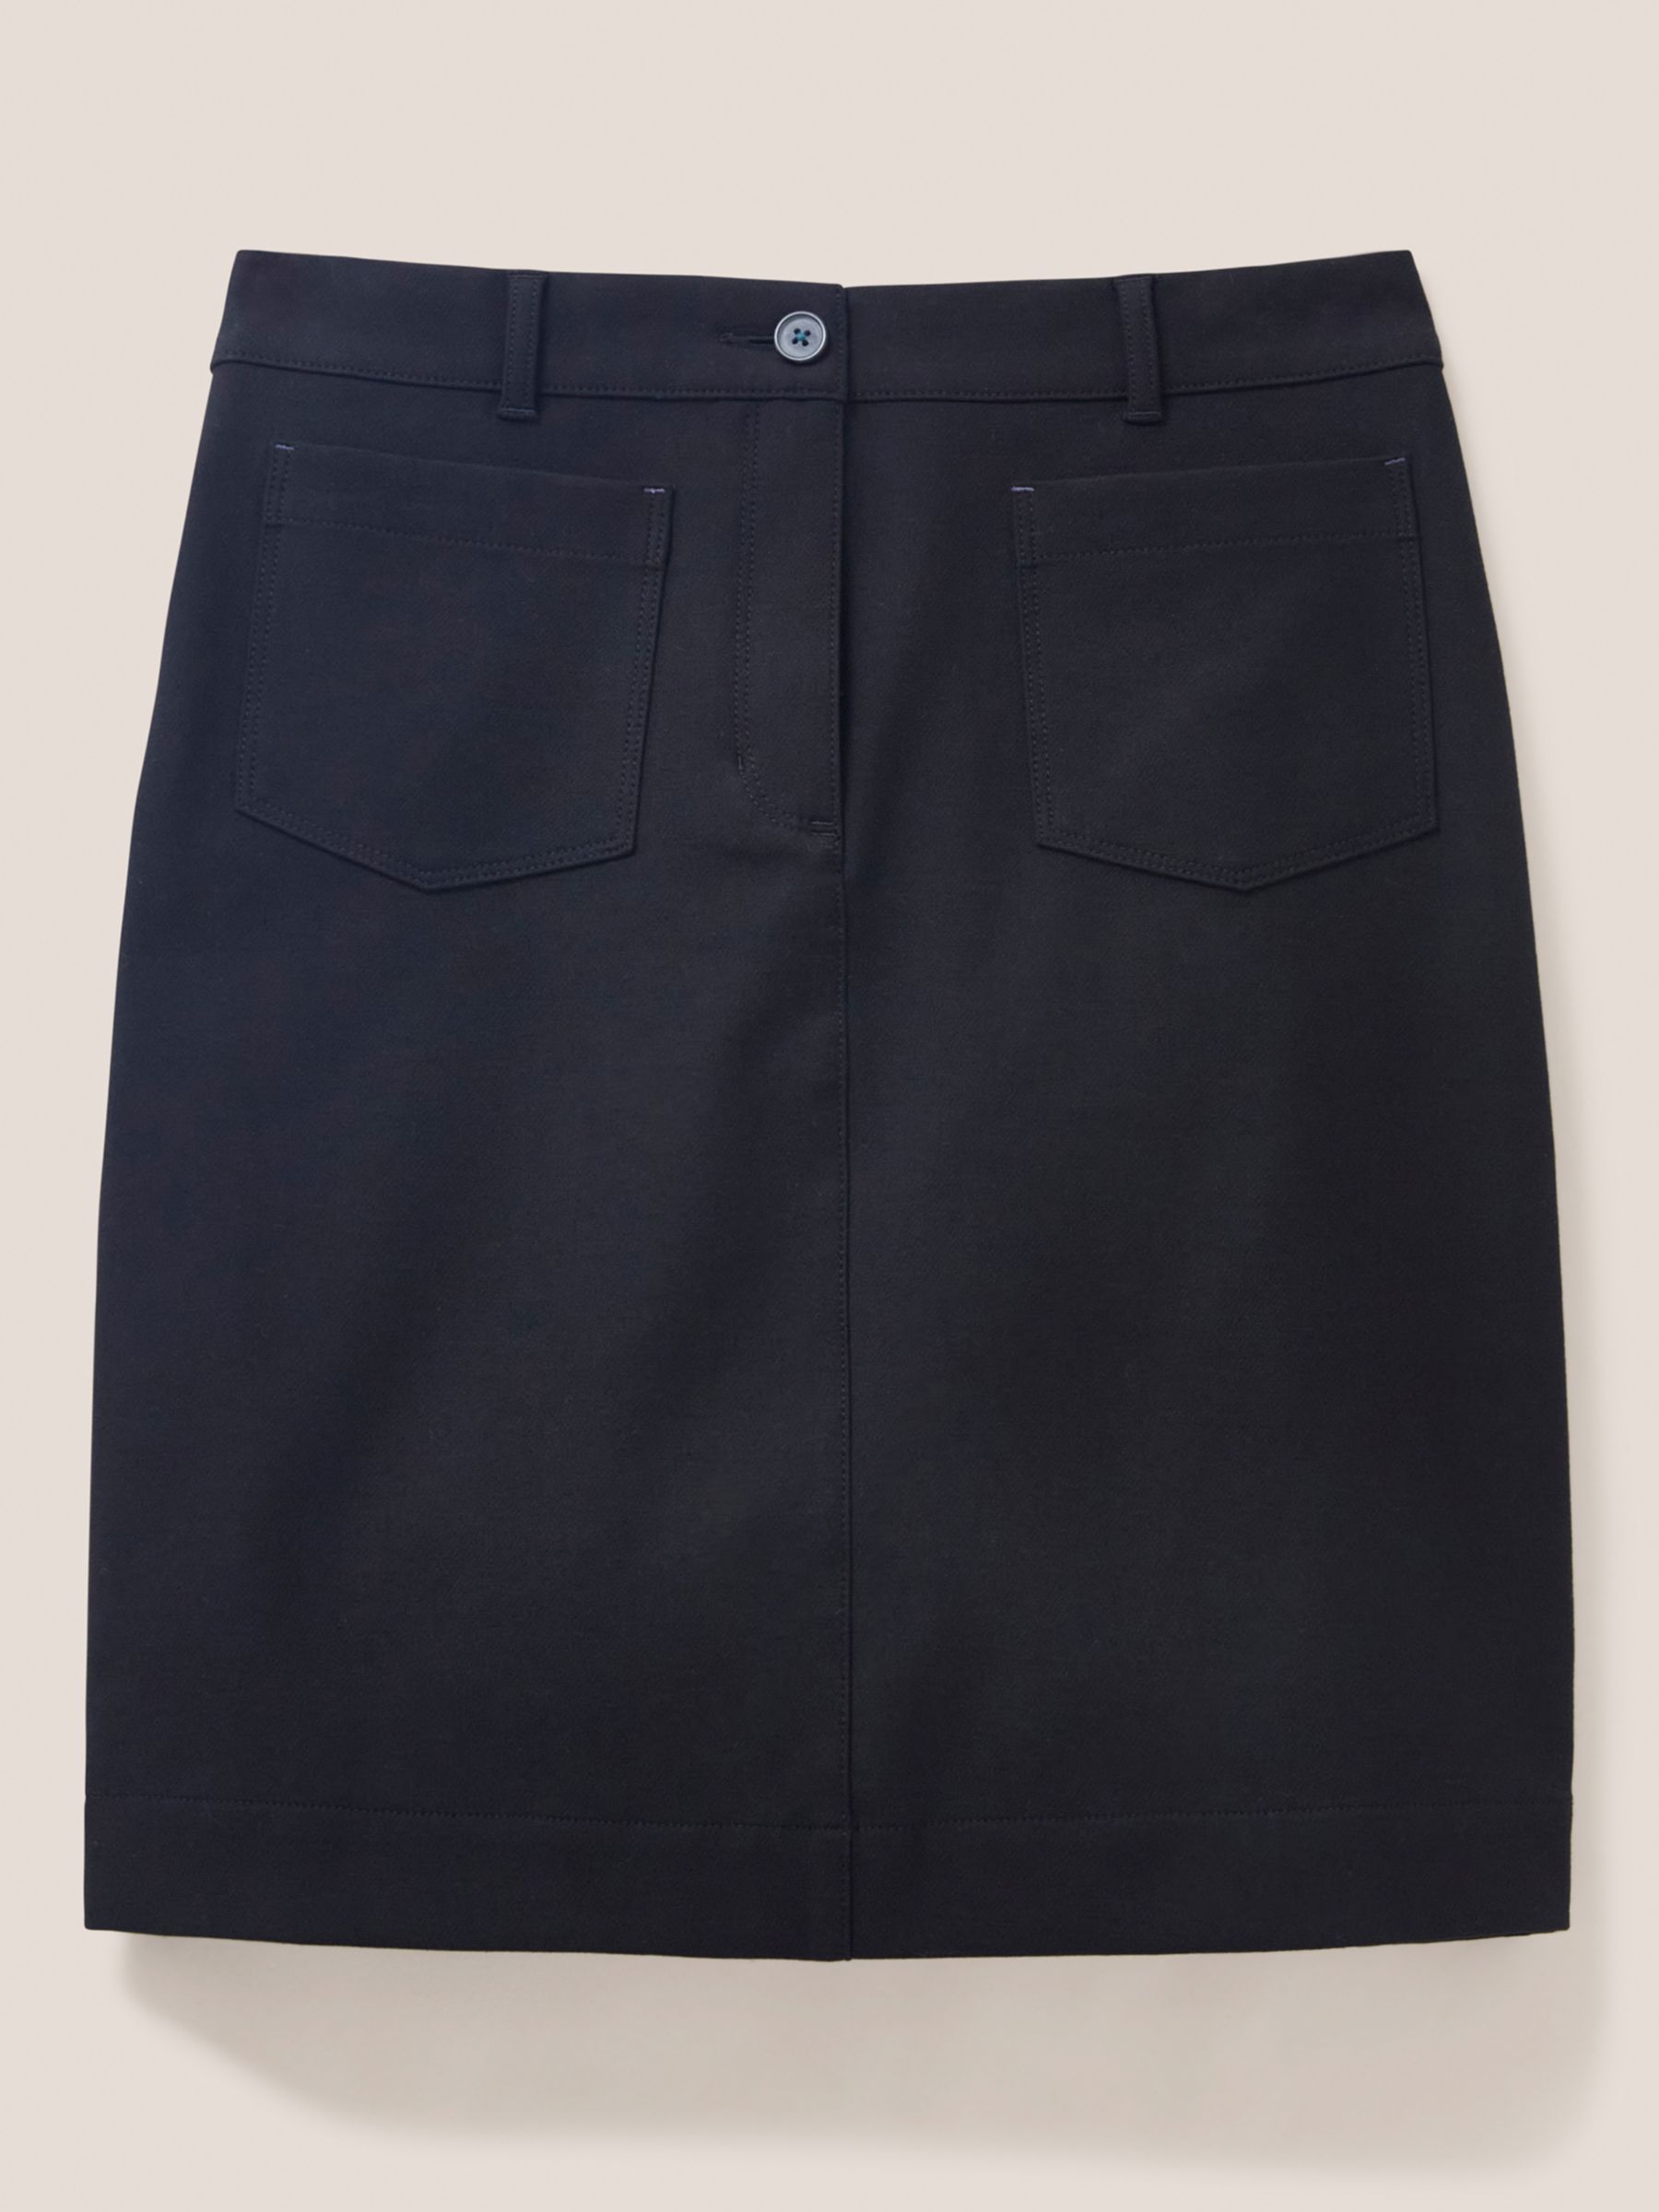 Buy White Stuff Melody Stretch Skirt, Pure Black Online at johnlewis.com